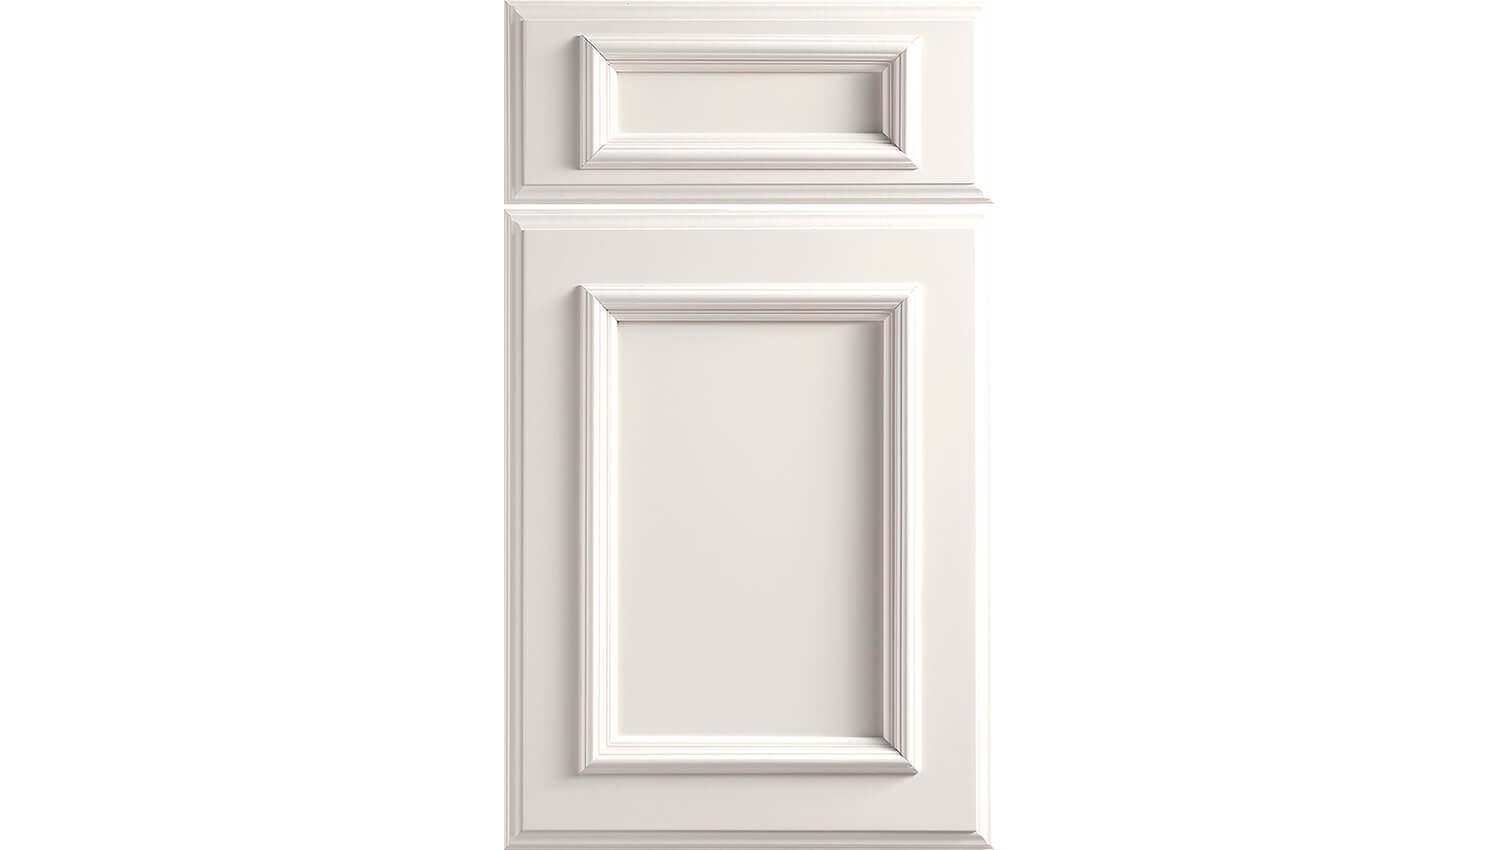 St. Augustine is an elegant flat panel door from Dura Supreme with beautiful molding details and solid construction.